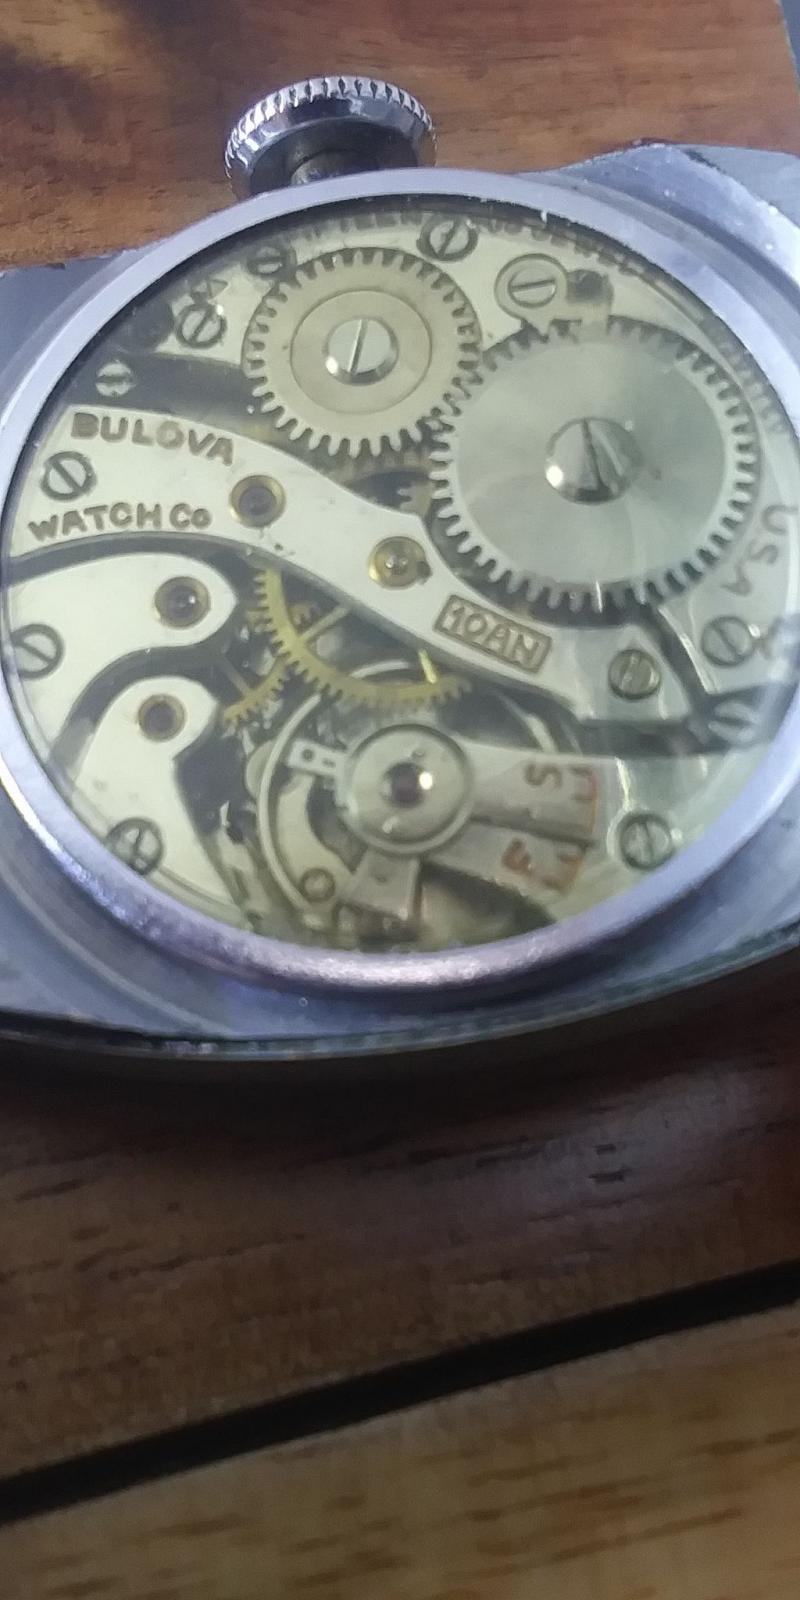 The only thing on the back of the watch just says open